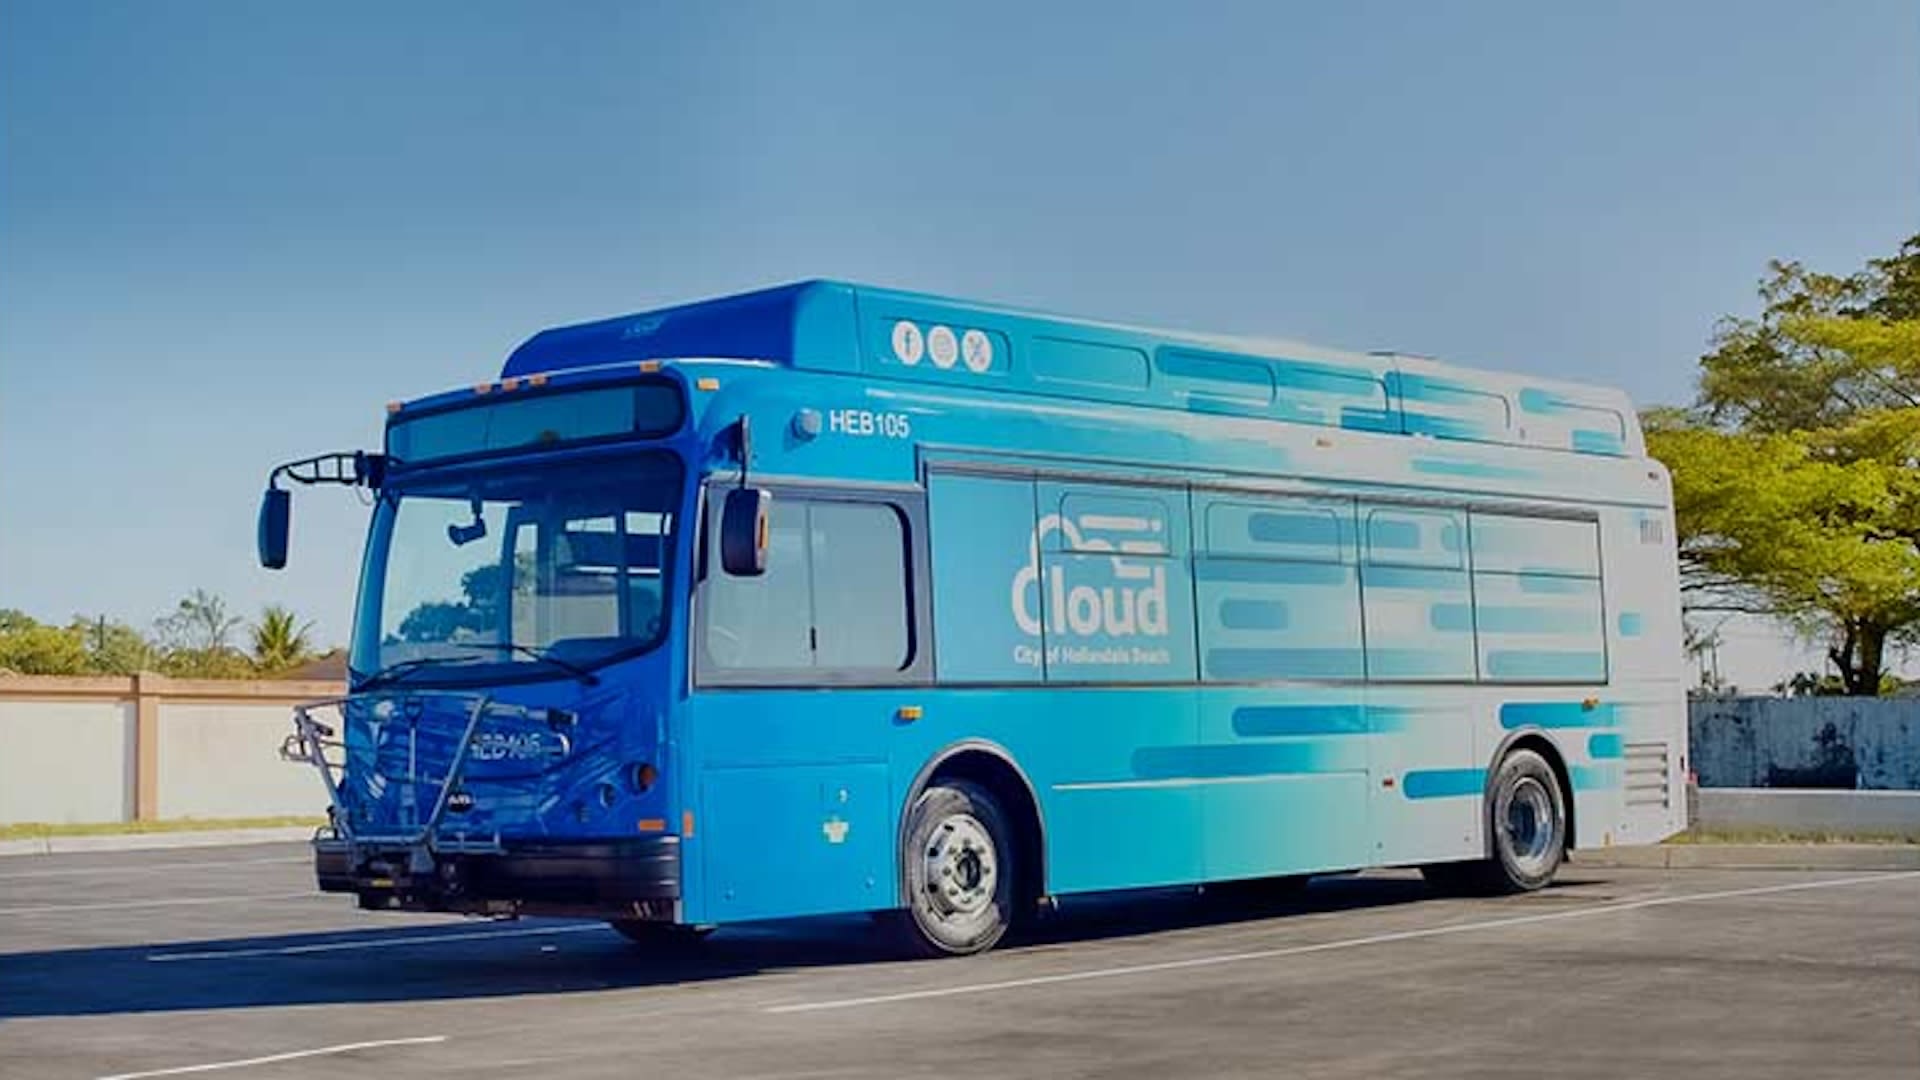 Officials celebrate opening of fully electric bus fleet: 'Progress continues to be at the forefront of this city'